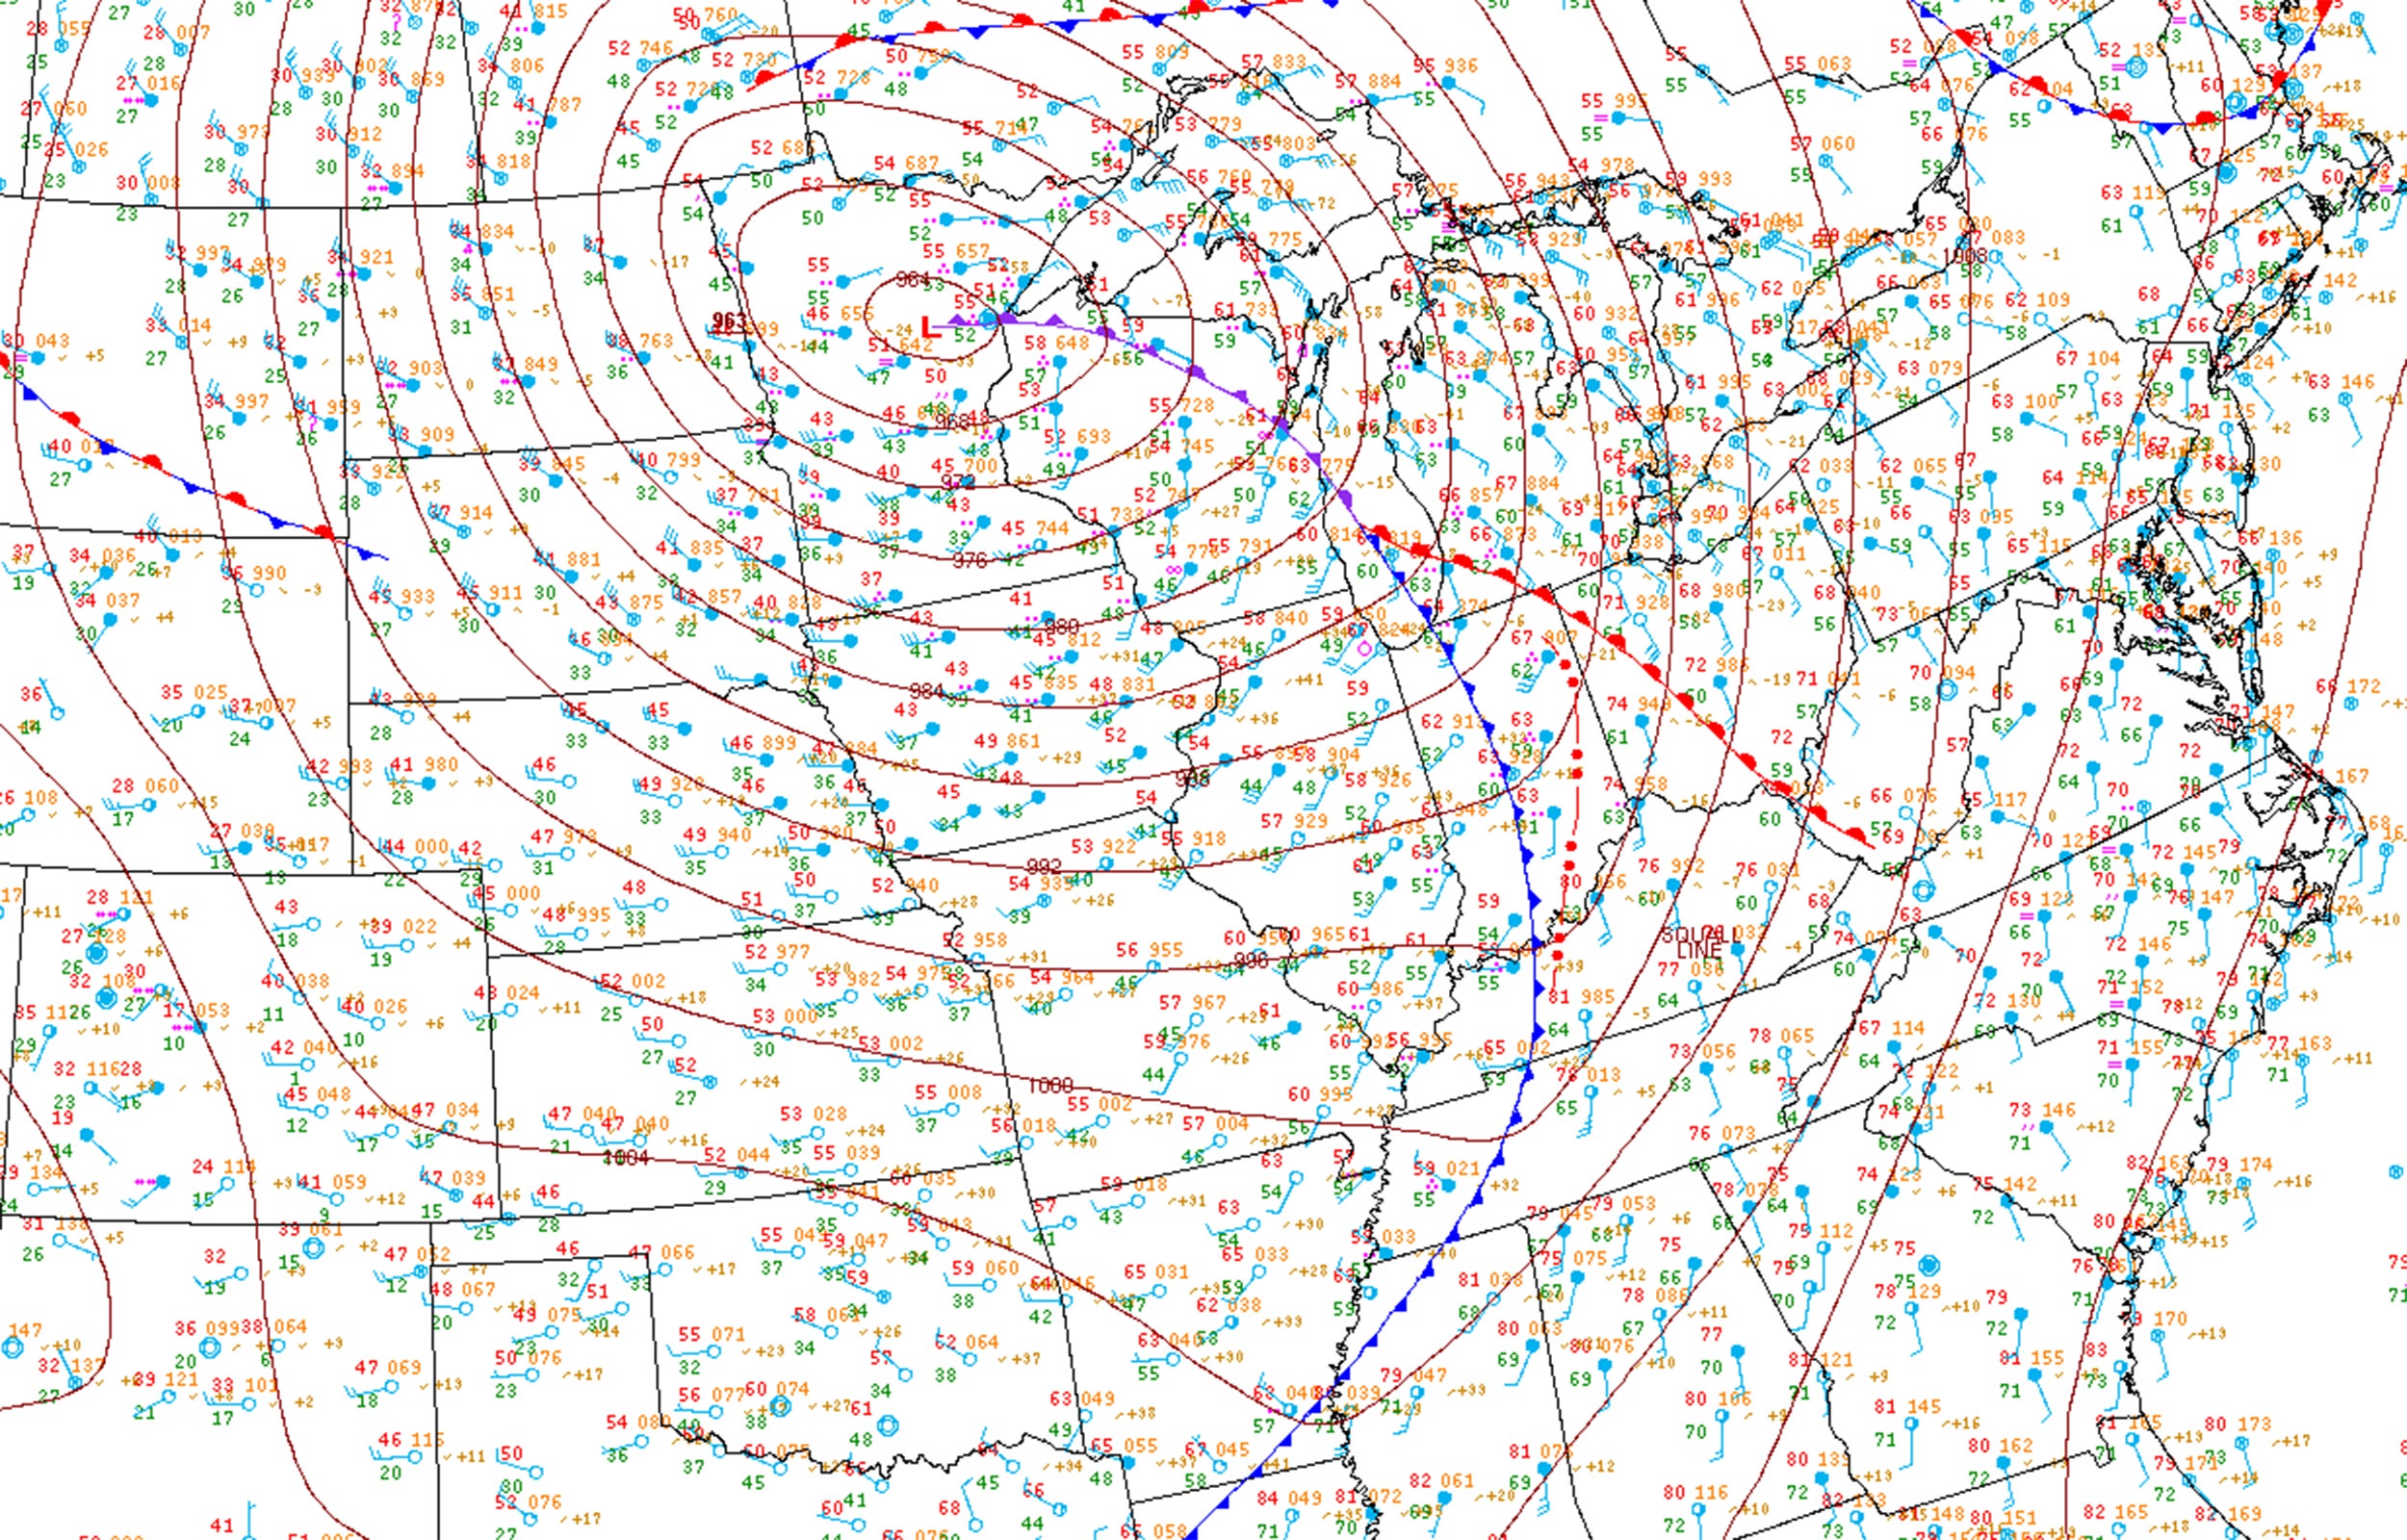 The strongest low-pressure system ever recorded in Minnesota happened on October 27, 2011.